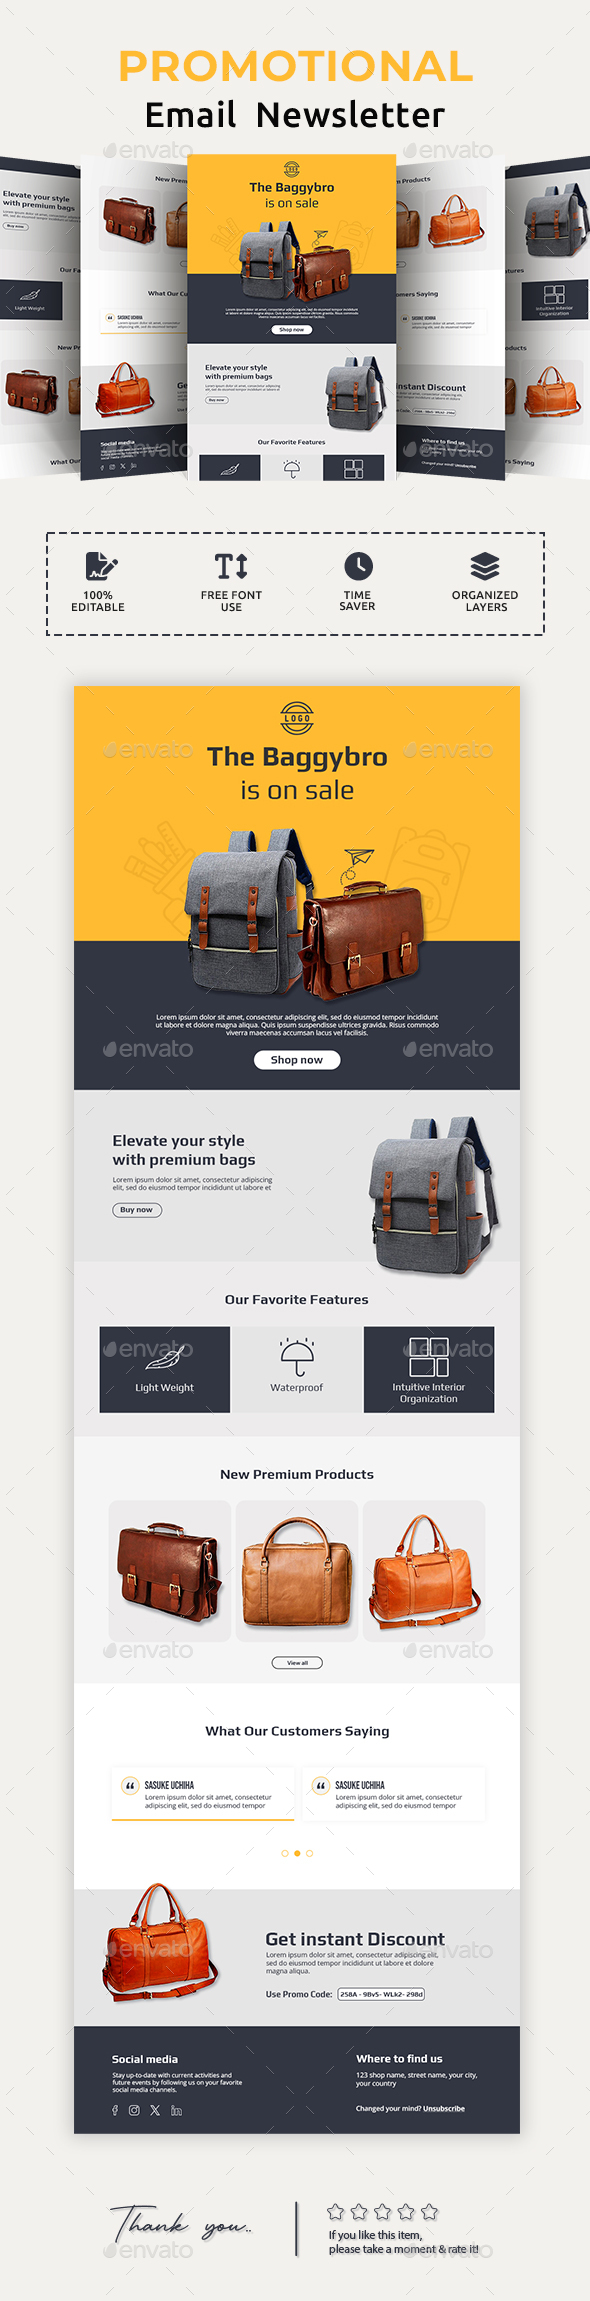 [DOWNLOAD]Bags Email Newsletter PSD Template